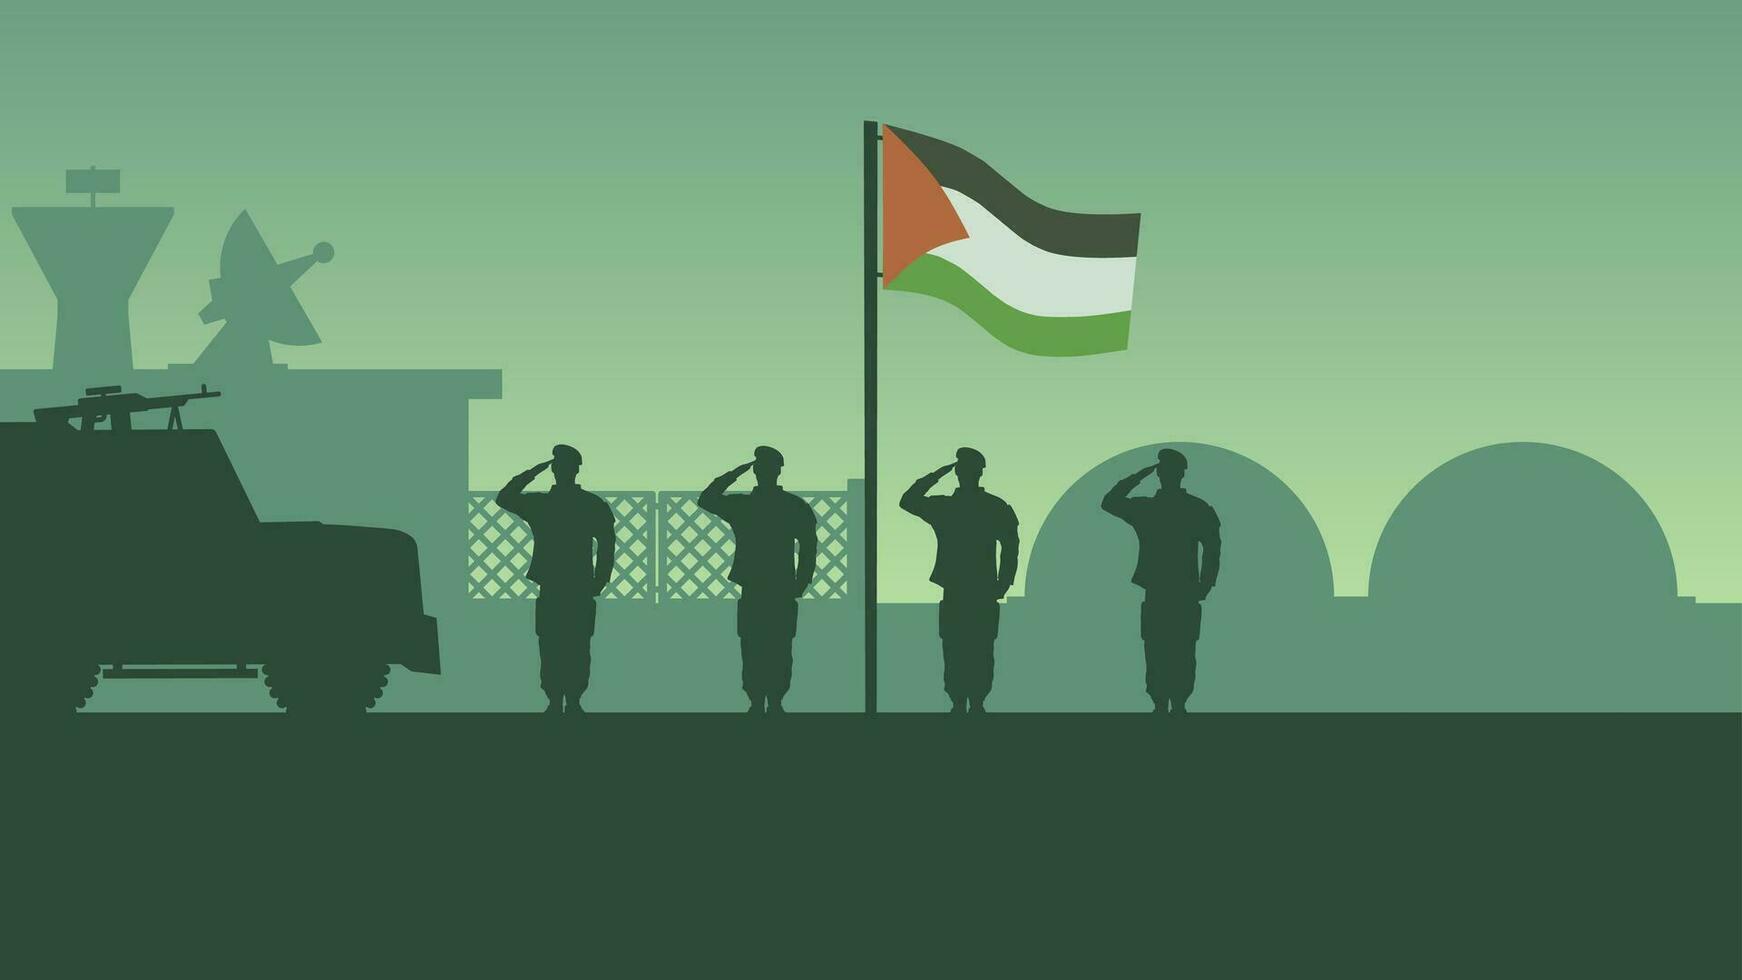 Palestine military base landscape vector illustration. Silhouette of army salute to palestine flag in military base. Military illustration for background, wallpaper, issue and conflict